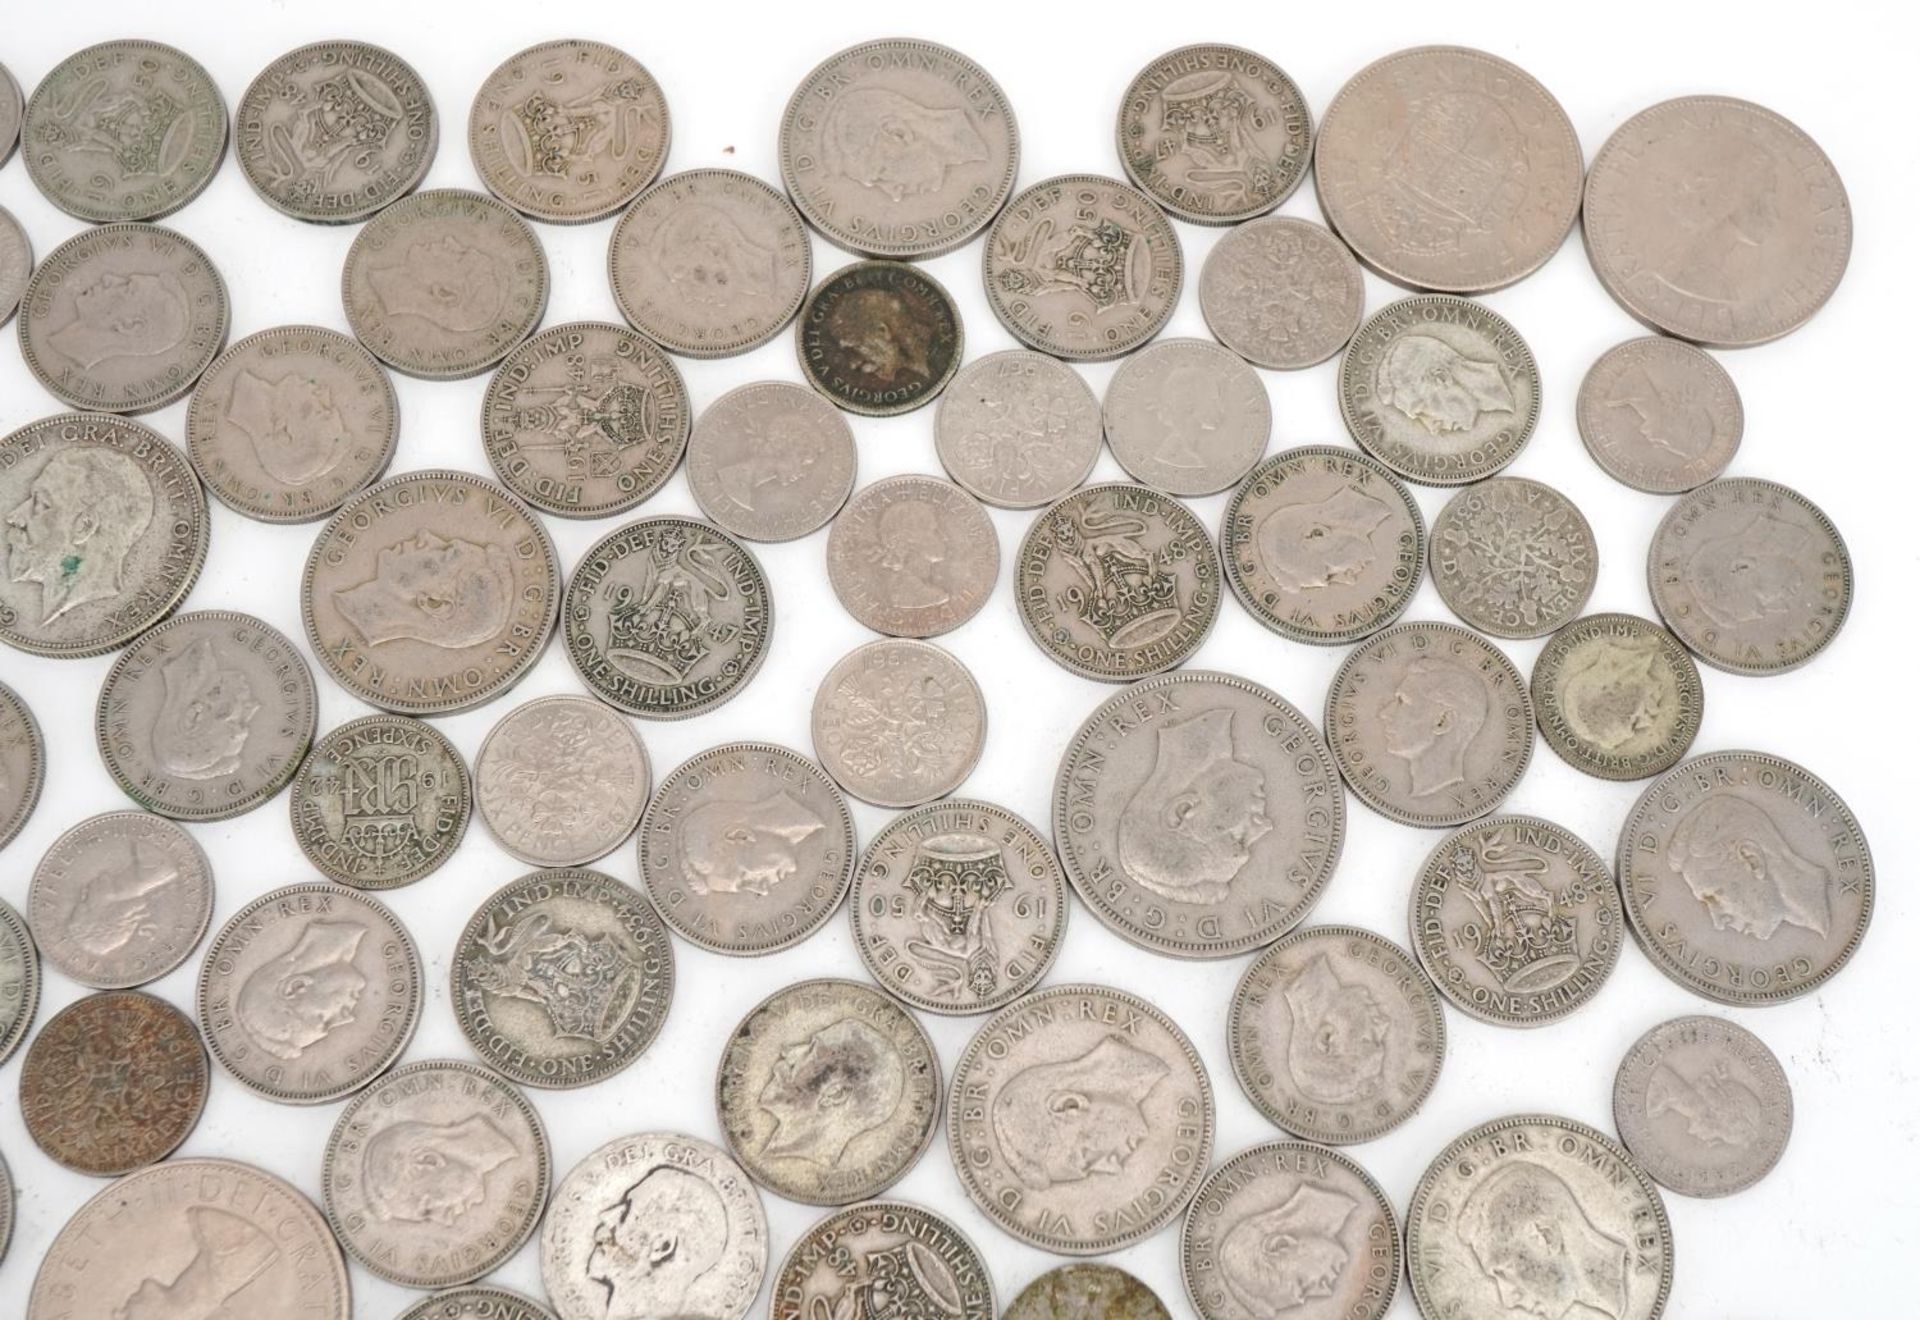 British pre decimal coinage, some pre 1947, including florins and sixpences - Image 3 of 5